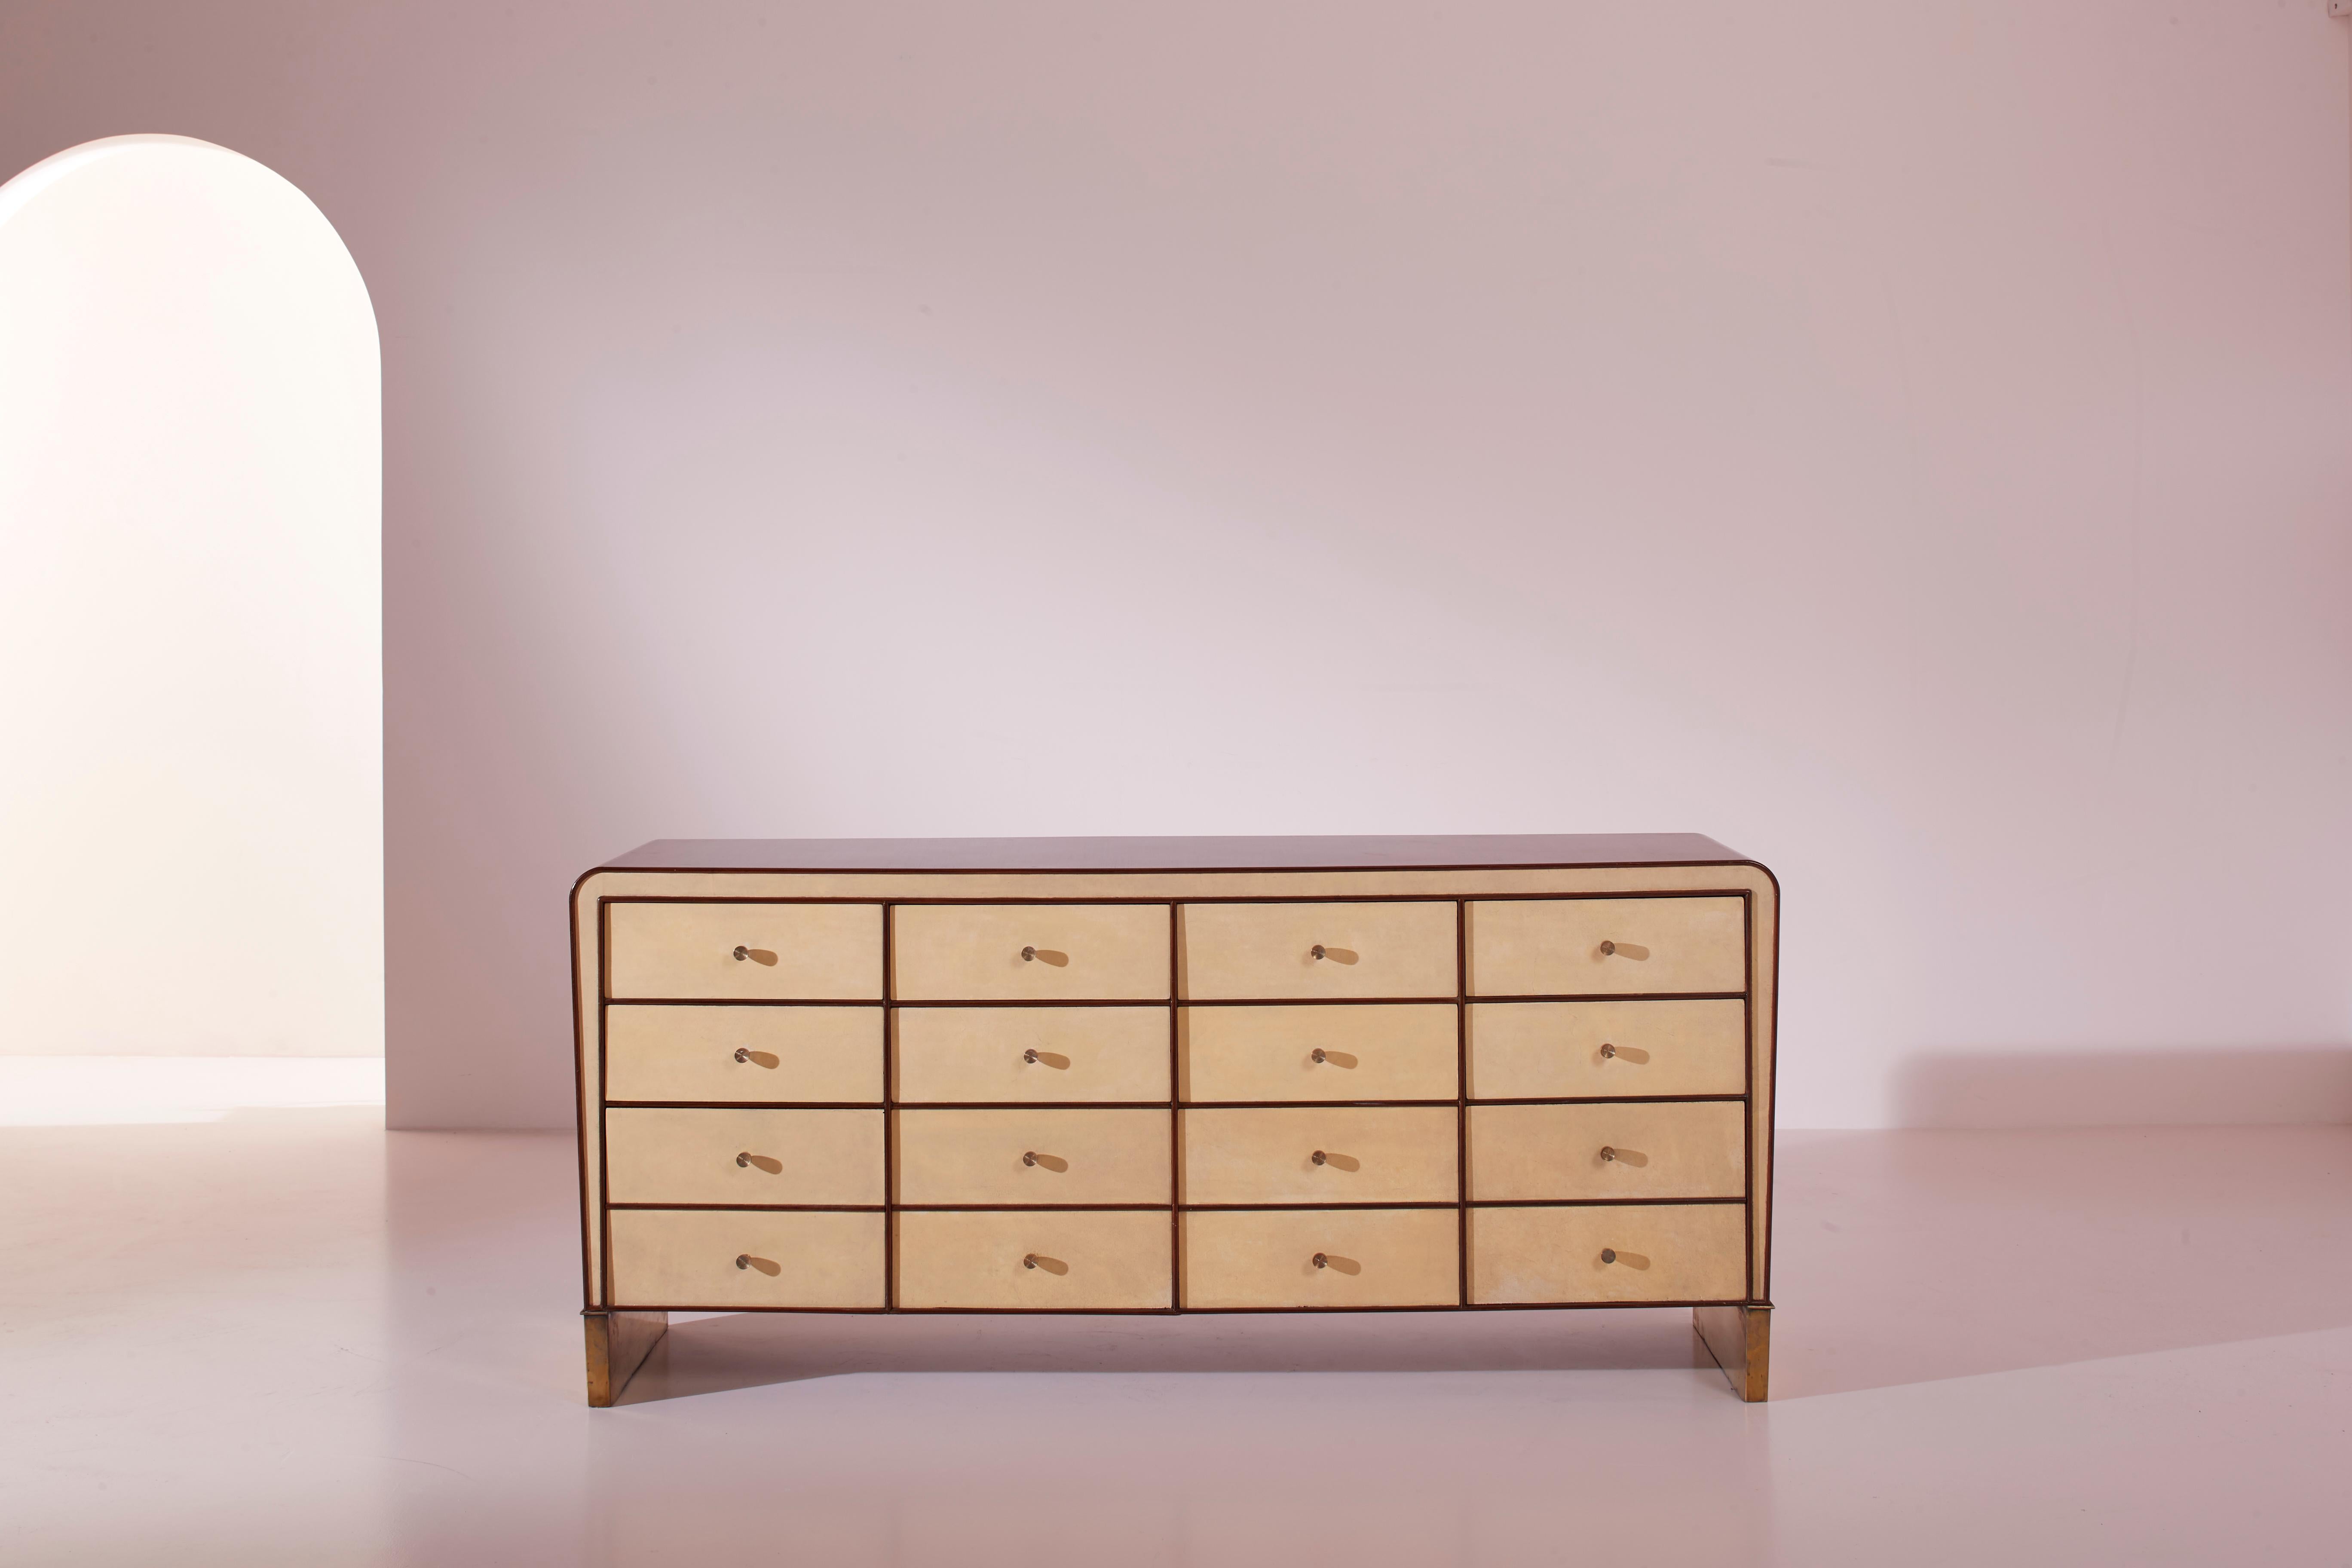 Chest of drawers in American walnut, parchment, and brass, designed by Gio Ponti in the 1930s and produced in Italy.

Elegant and slender, it rests on polished metal triangular feet, showcasing the mastery in combining three materials that blend